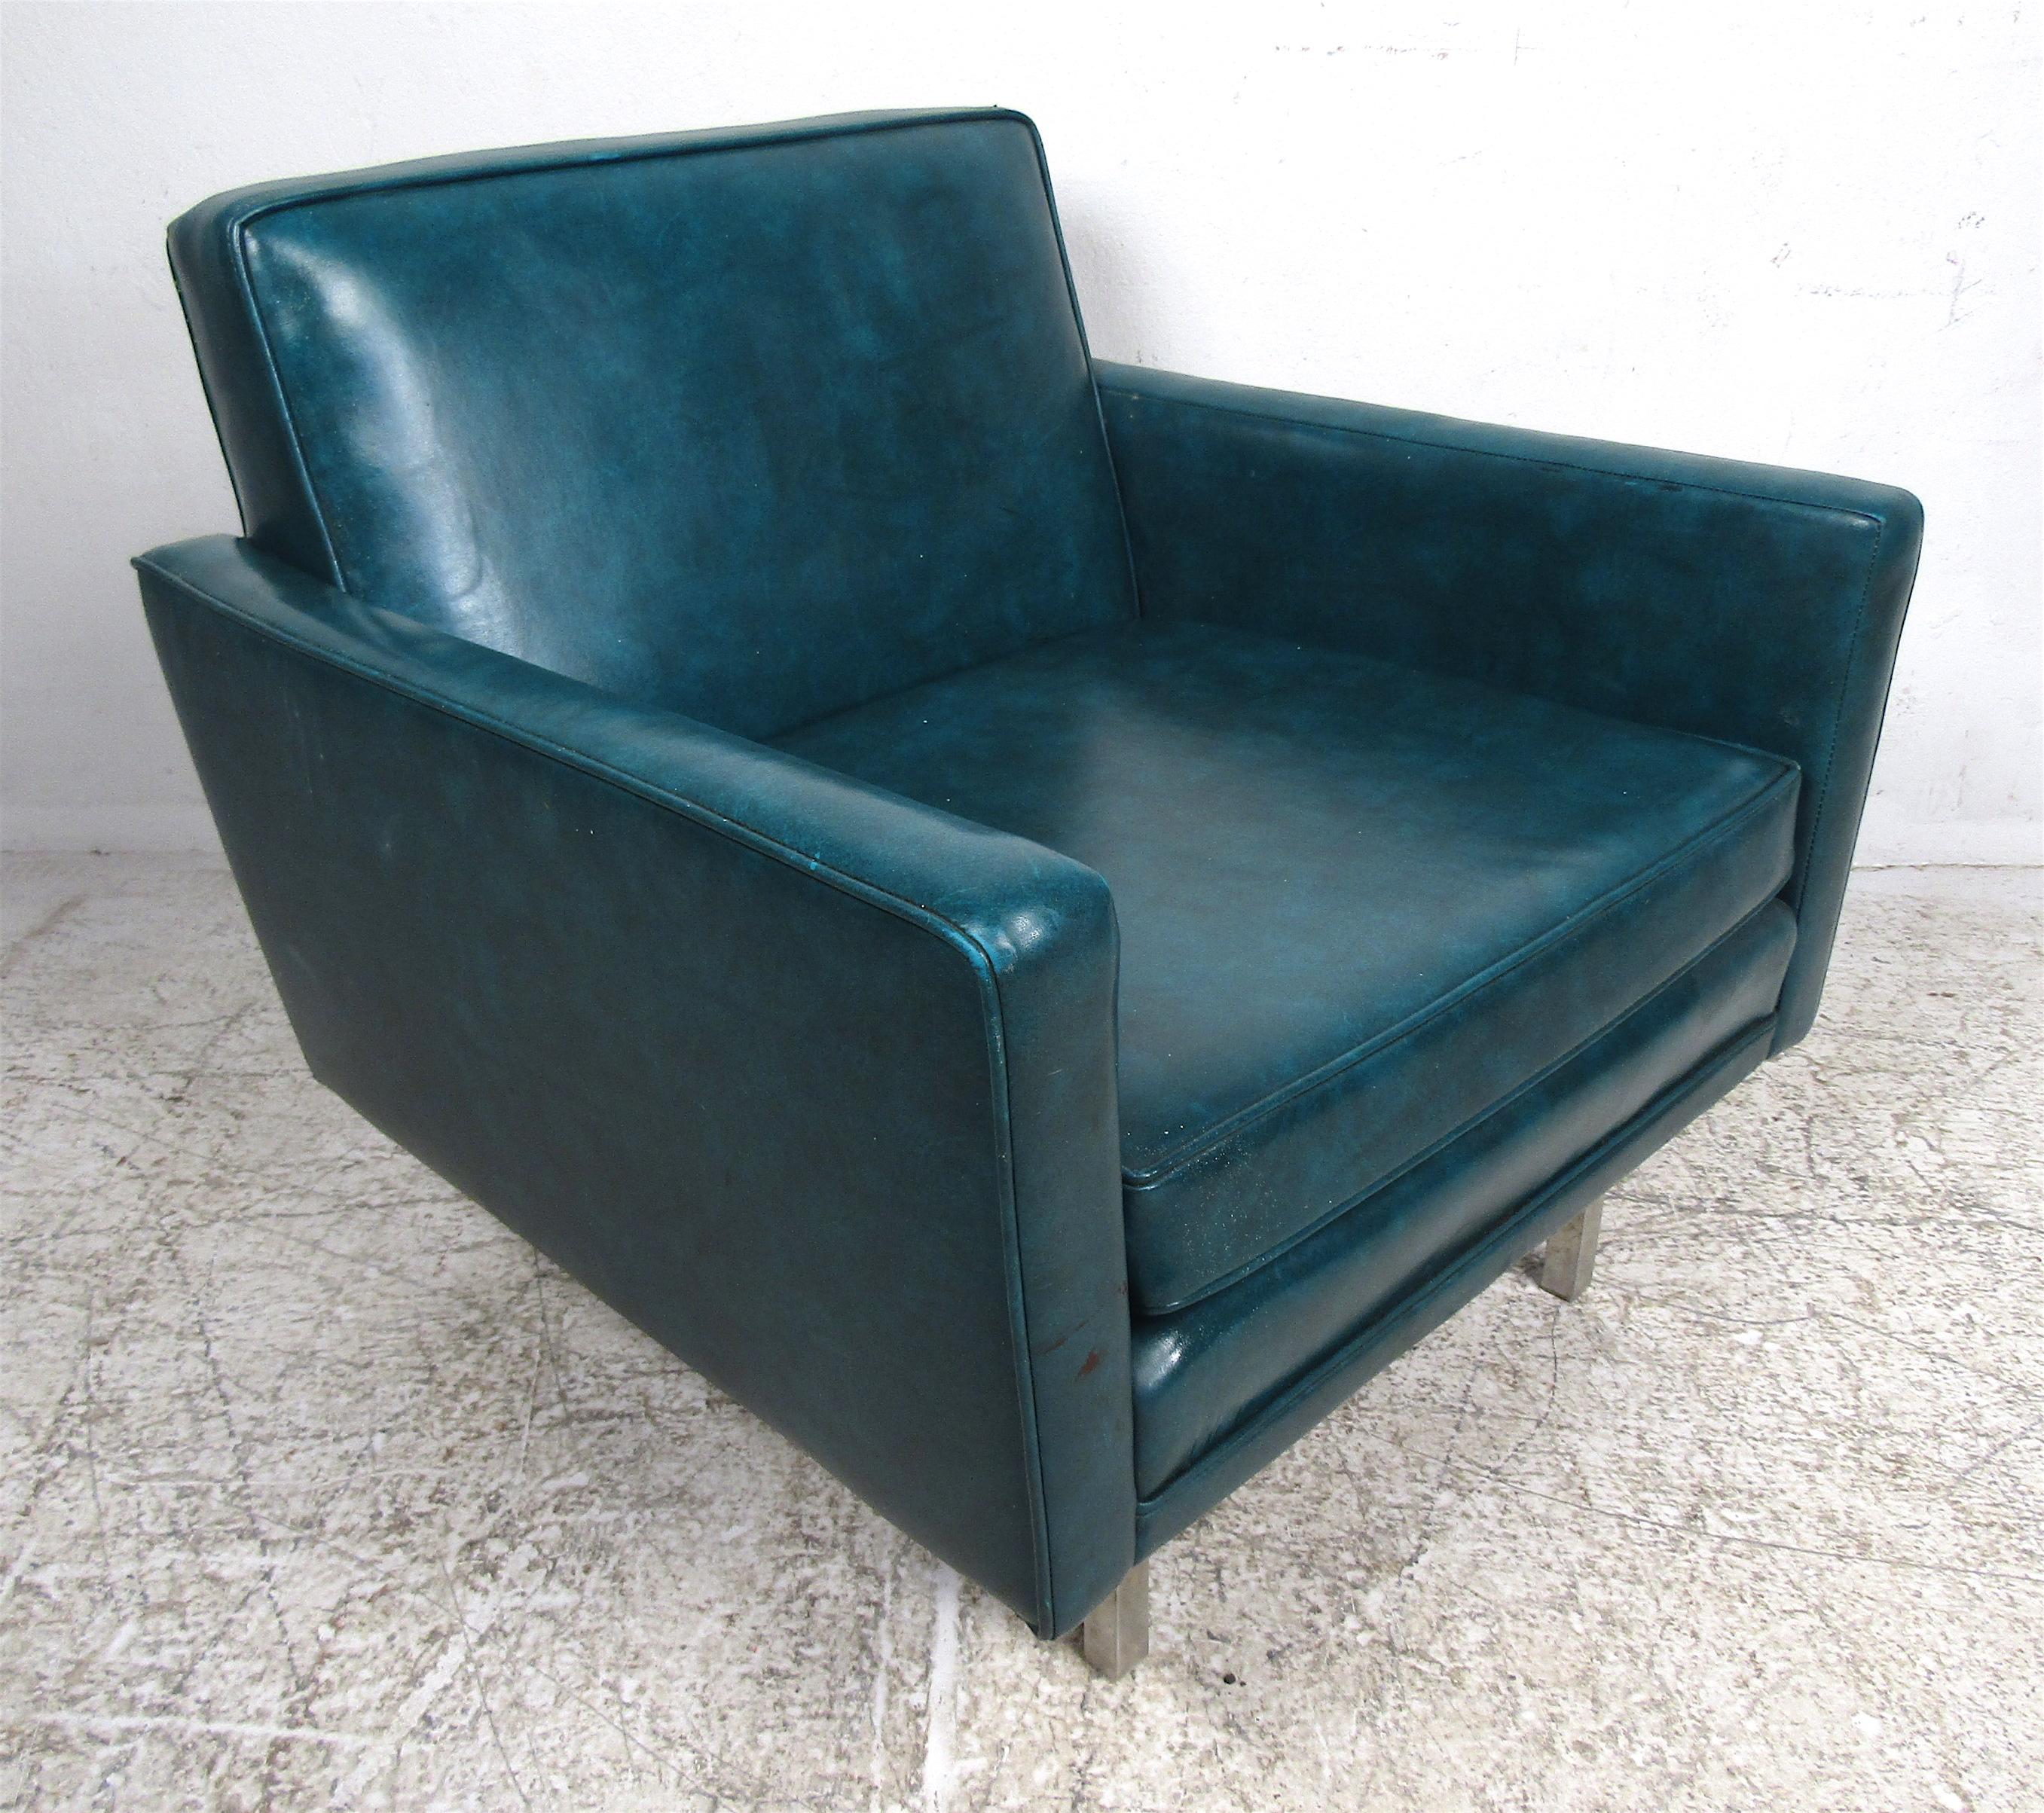 A lovely Mid-Century Modern club chair covered in green vinyl. The low armrests, thick padded cushion, and sturdy metal legs add to the allure. A comfortable and stylish piece that looks great in any seating arrangement. Please confirm the item